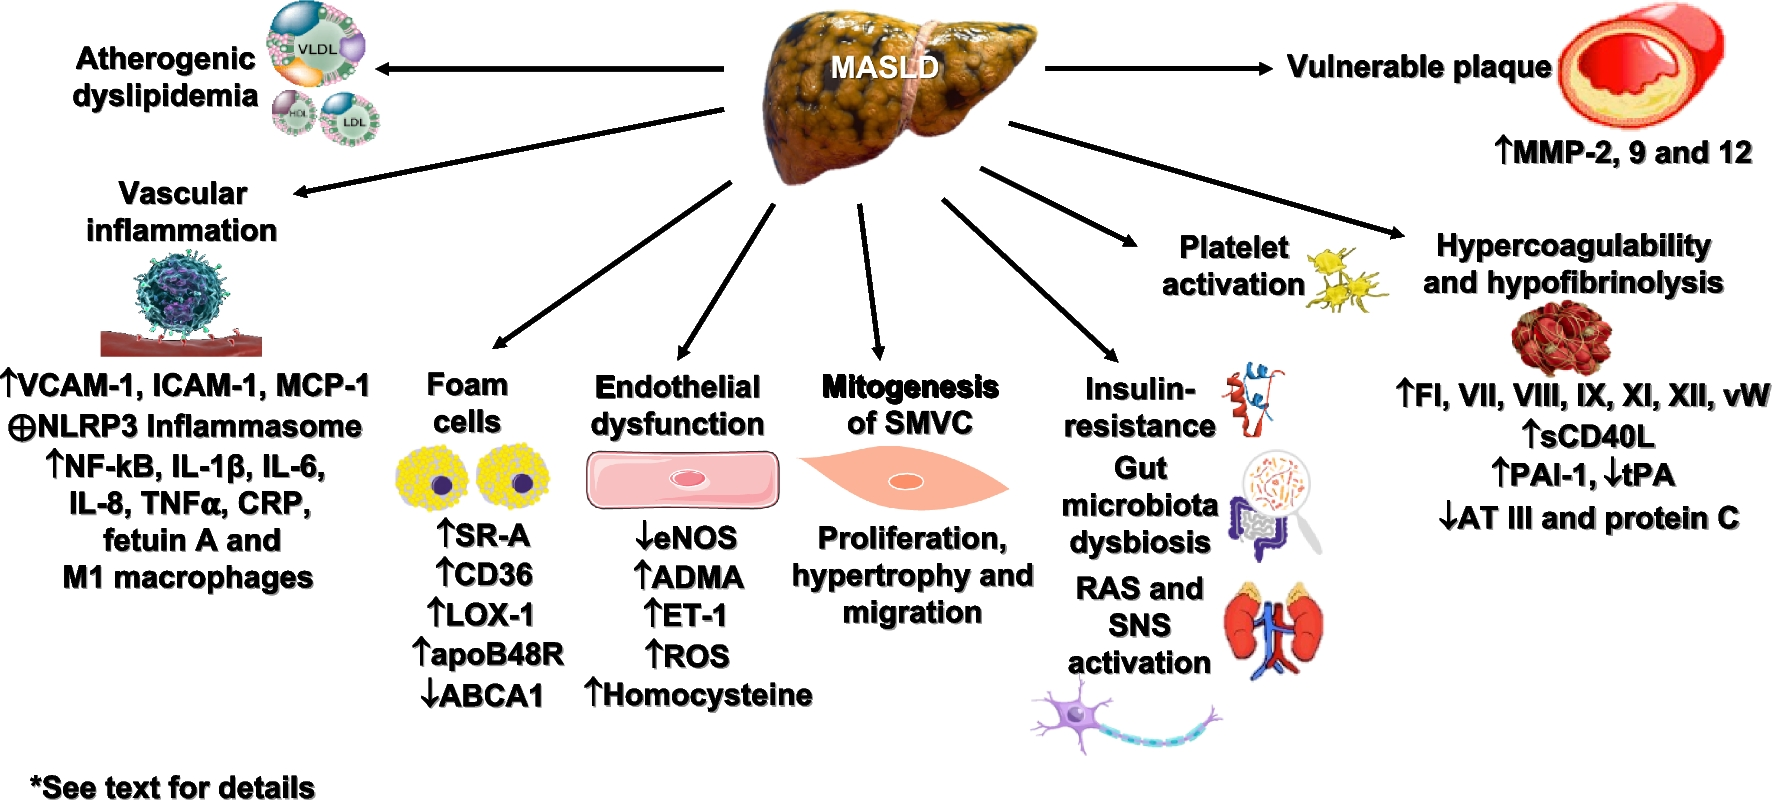 Metabolic dysfunction-associated steatotic liver disease and atherosclerosis